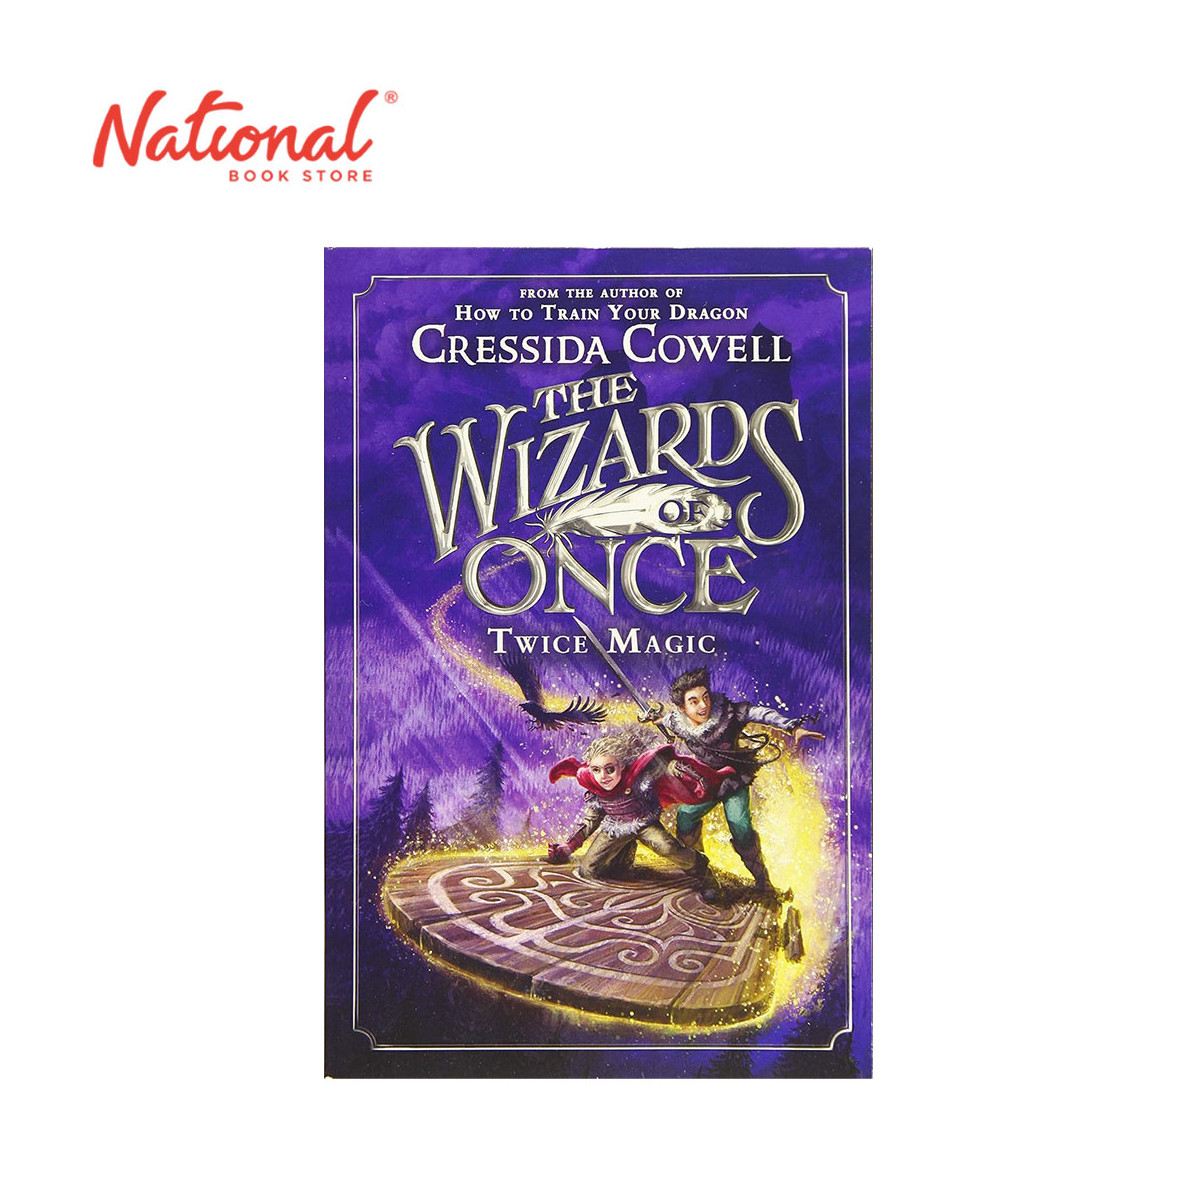 The Wizards Of Once: Twice Magic 2 By Cressida Cowell - Trade Paperback - Children's Fiction